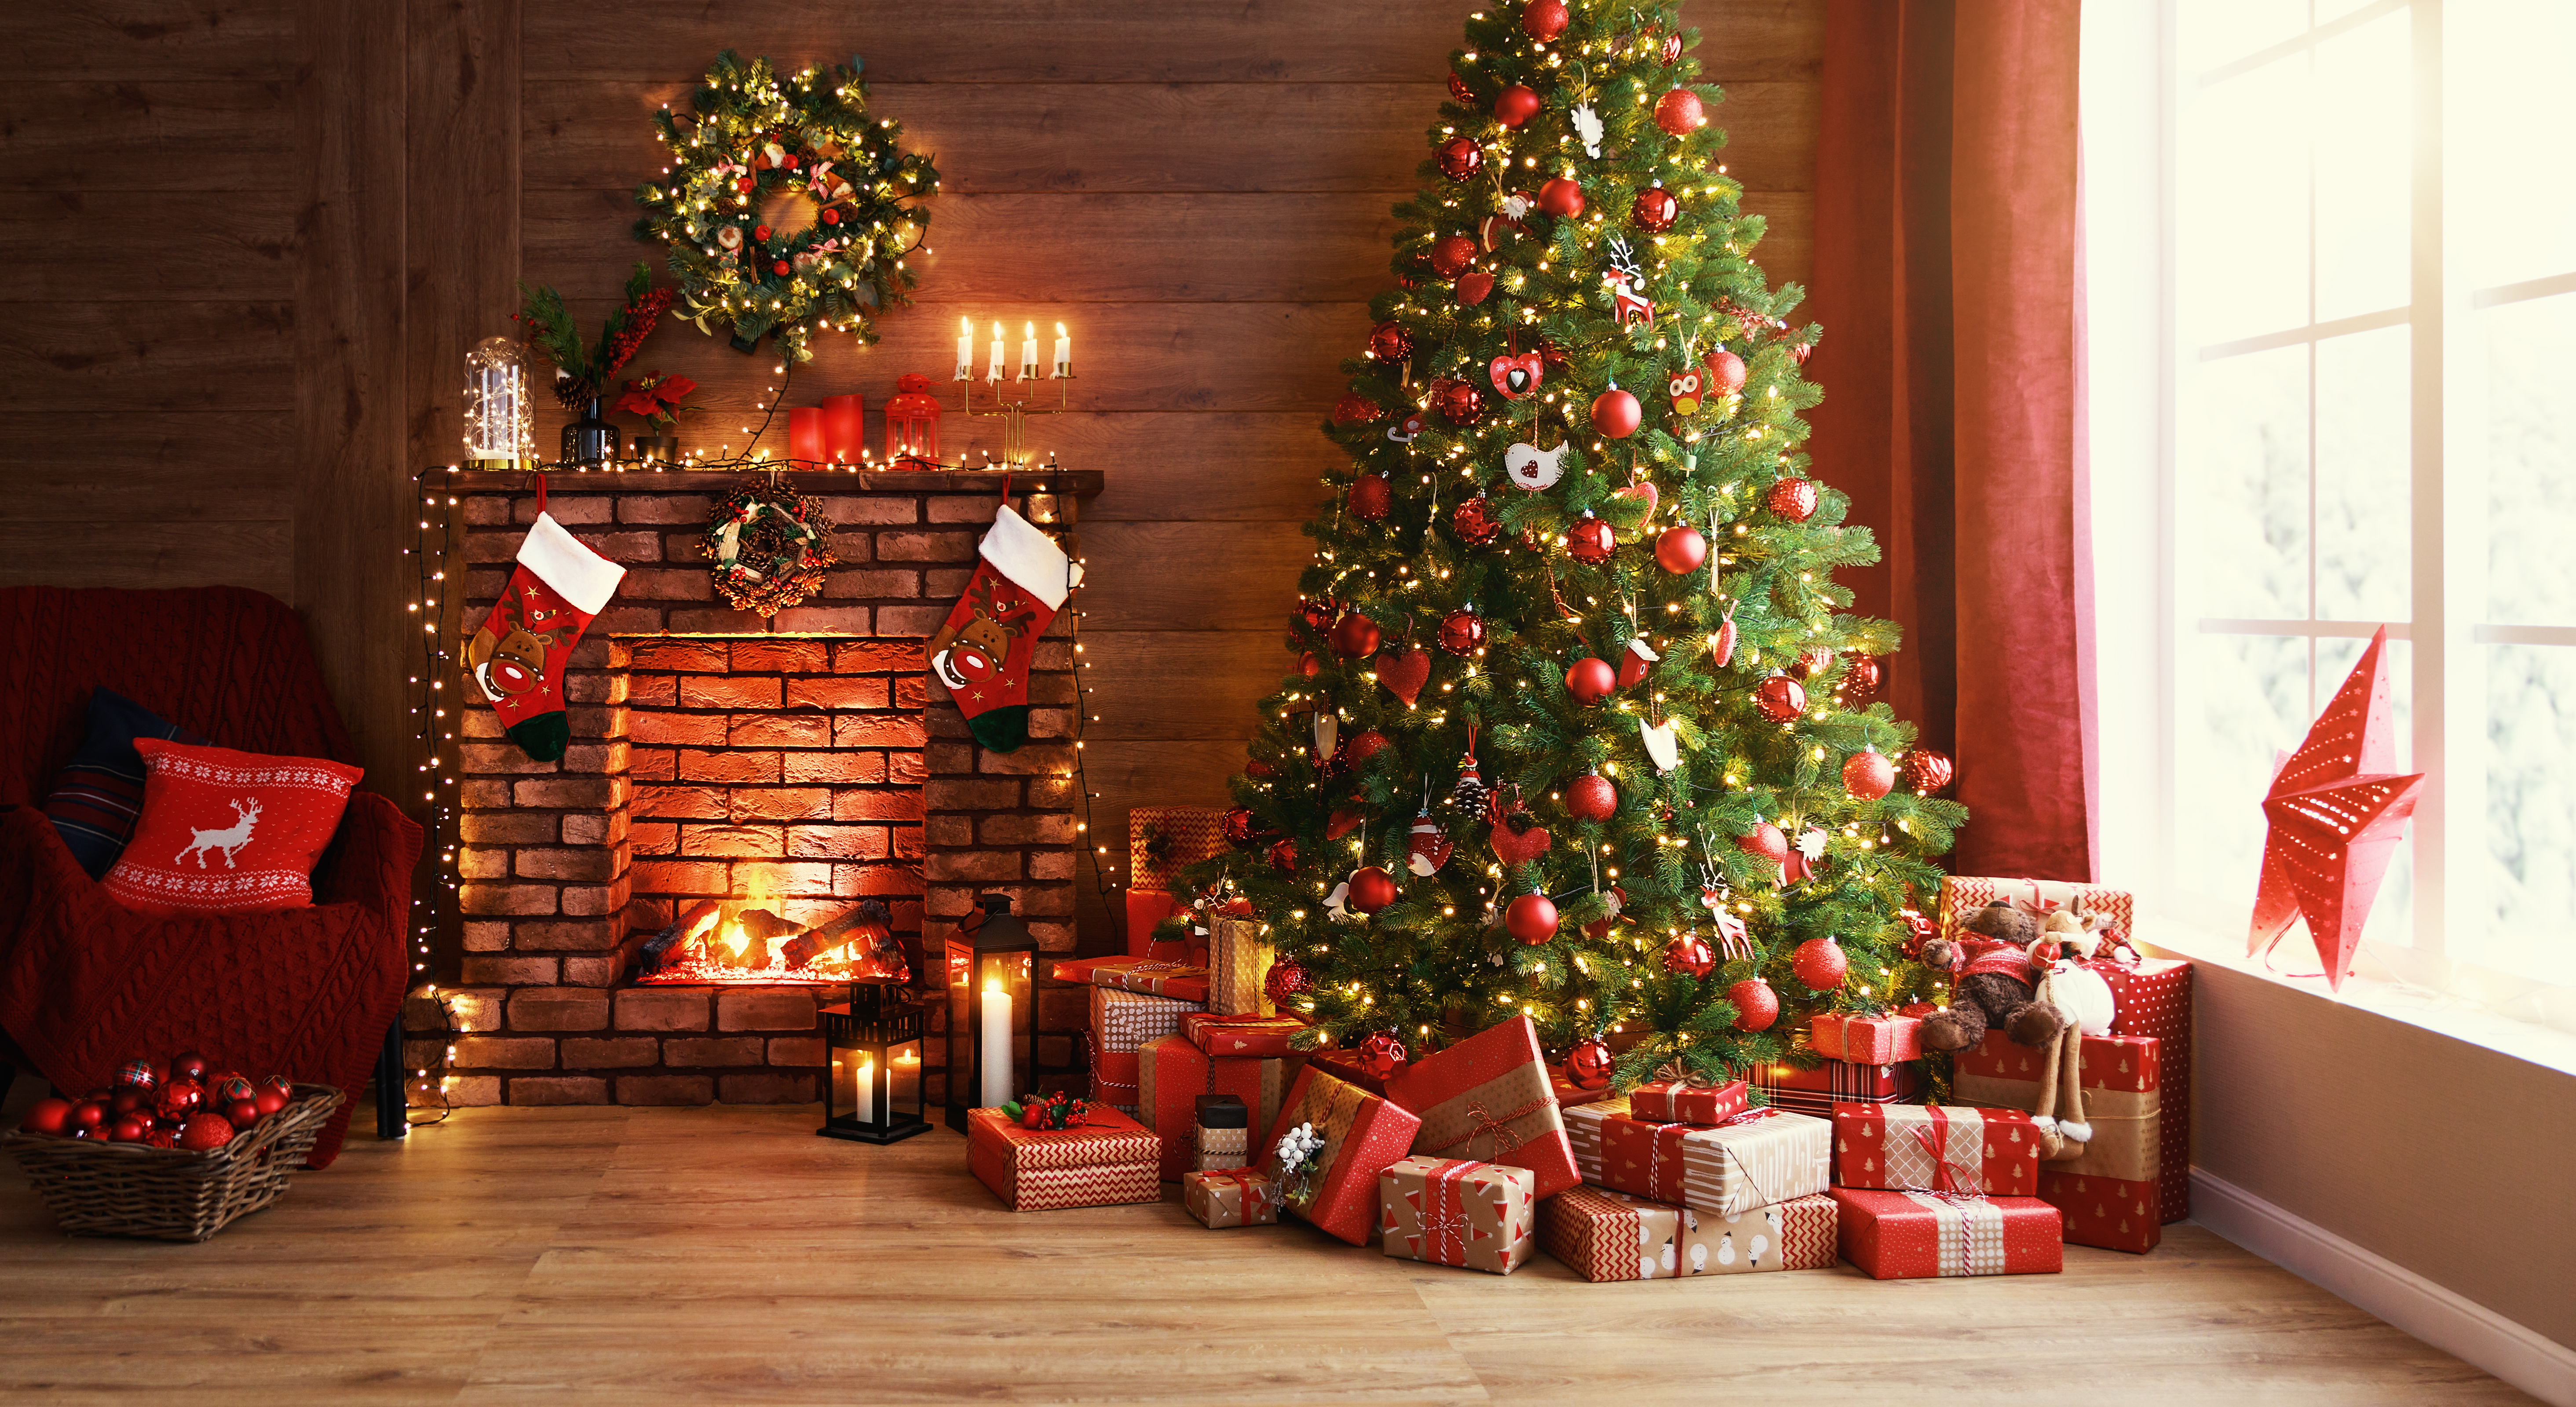 A Christmas tree placed next to a fireplace with gifts and decorations | Source: Shutterstock